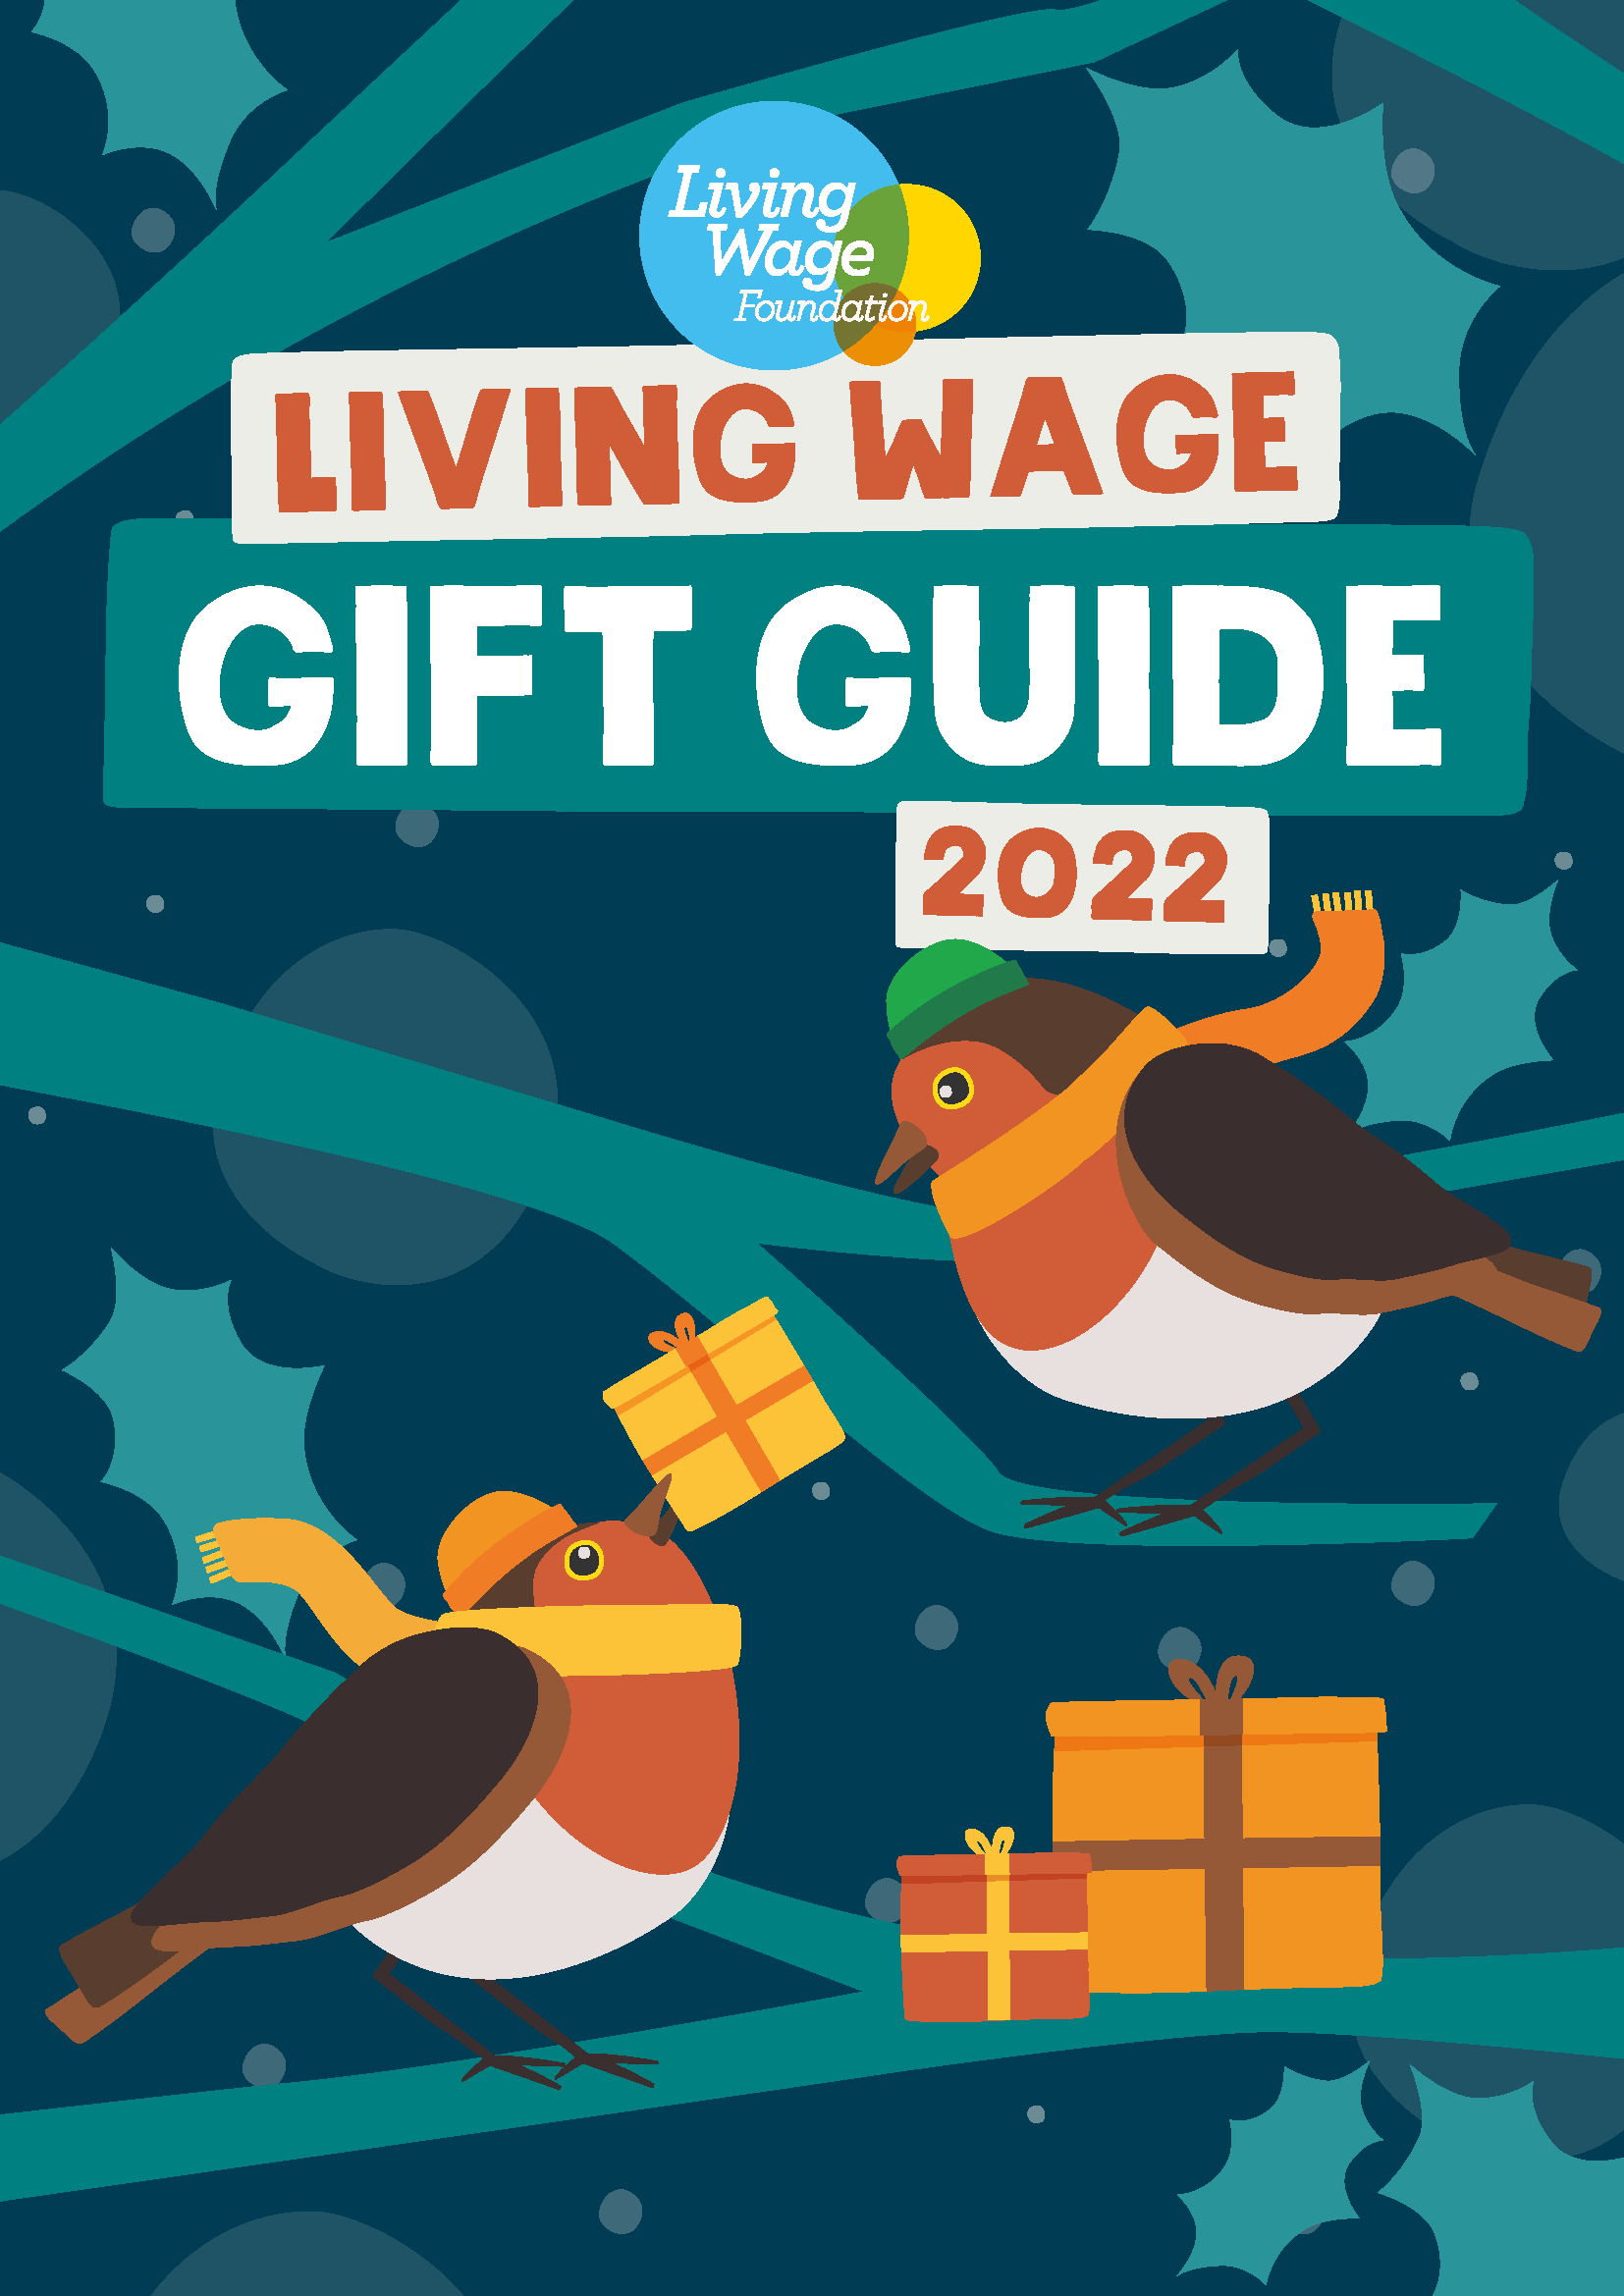 LIVING WAGE GIFT GUIDE 2022